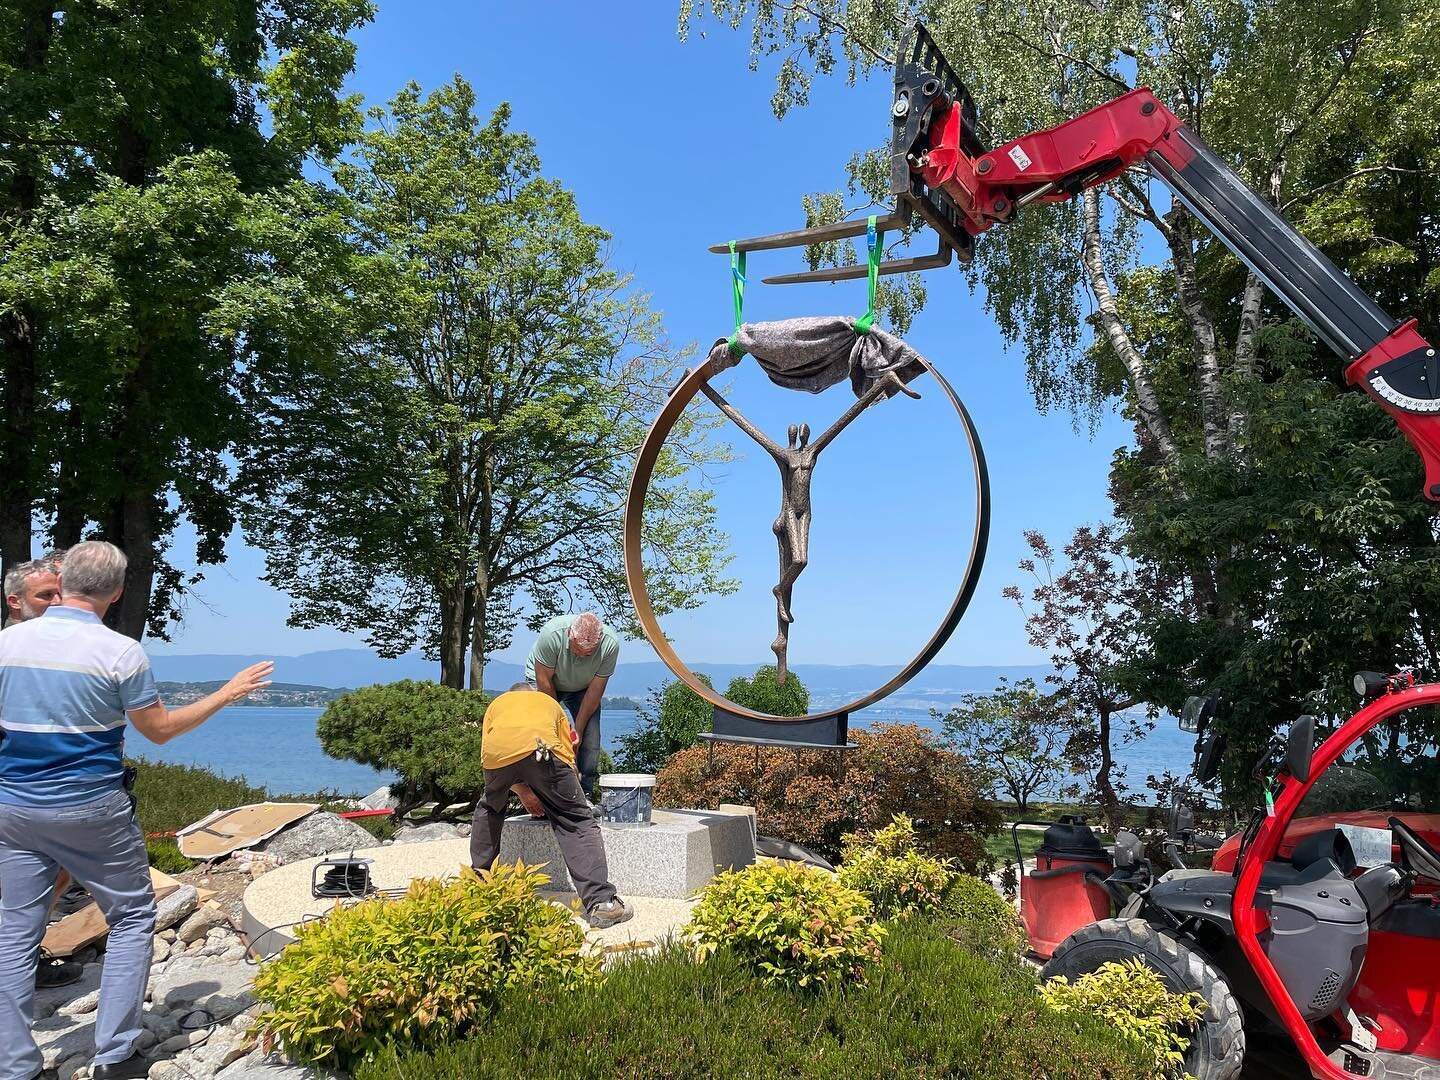 Installation of Harmony to its lakeside position. At 2.2 metres this is one of my largest works in bronze

#bronzesculpture #sculpture #sculptures #figurativesculpture #gardendesign #landscapedesign #sculptor #michaelspeller #installation #geneva